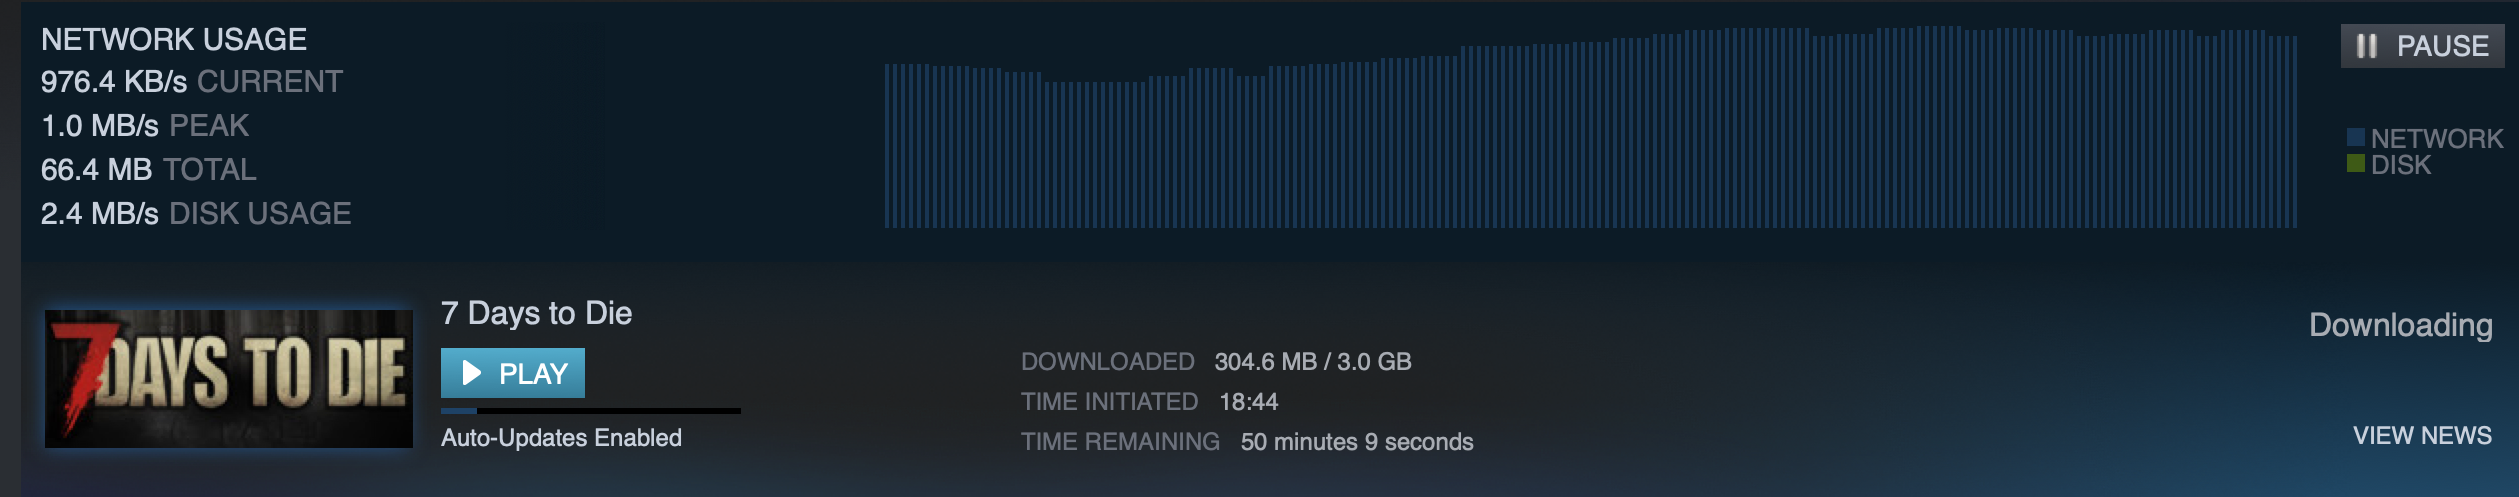 Downloading on steam is so slow фото 32